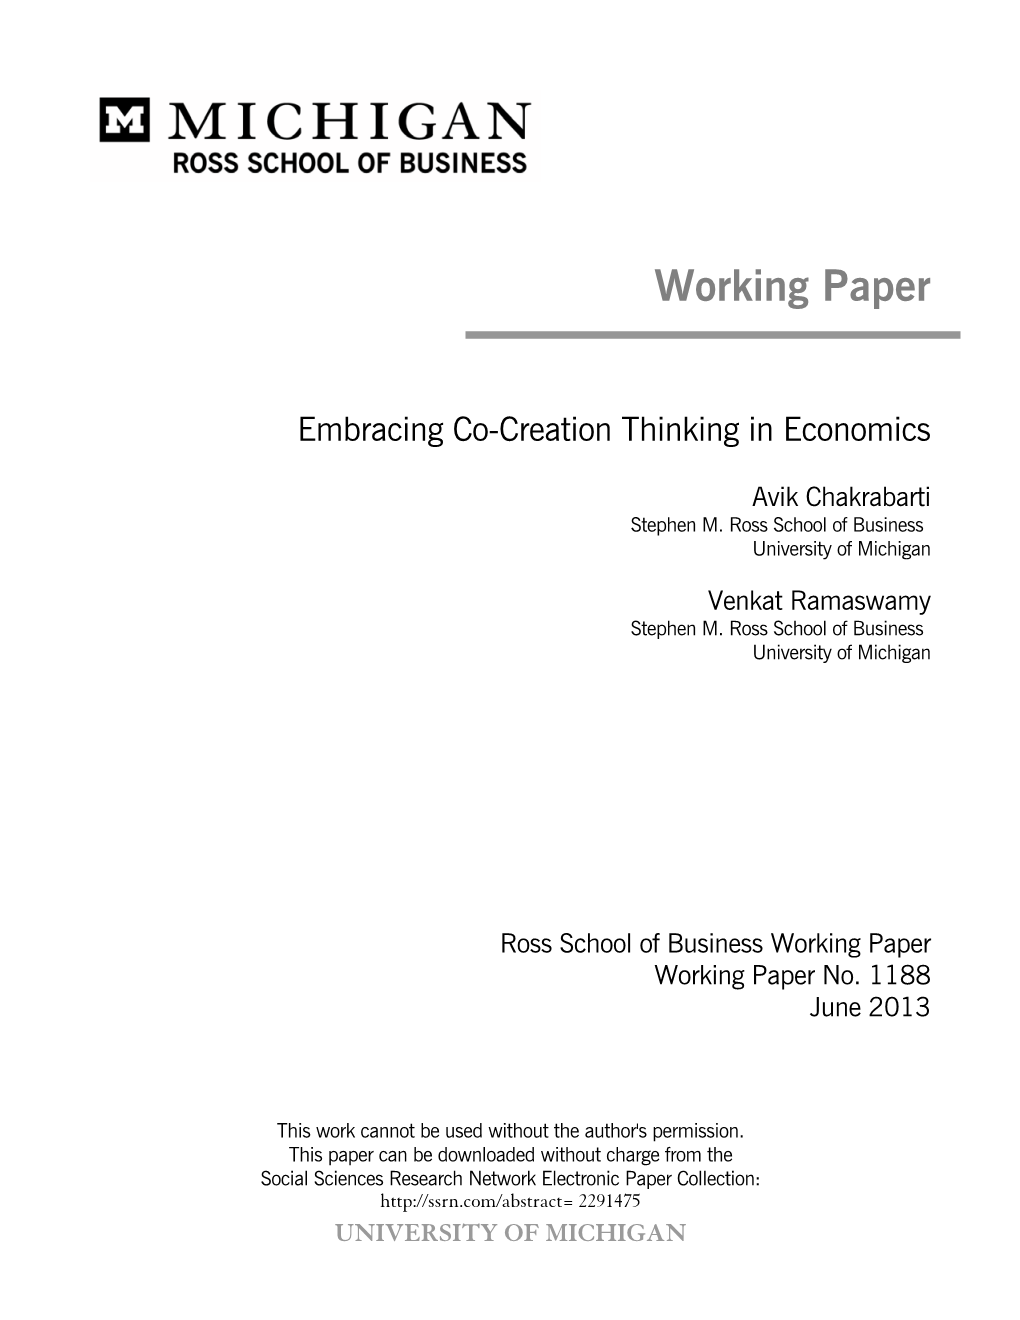 Embracing Co-Creation Thinking in Economics